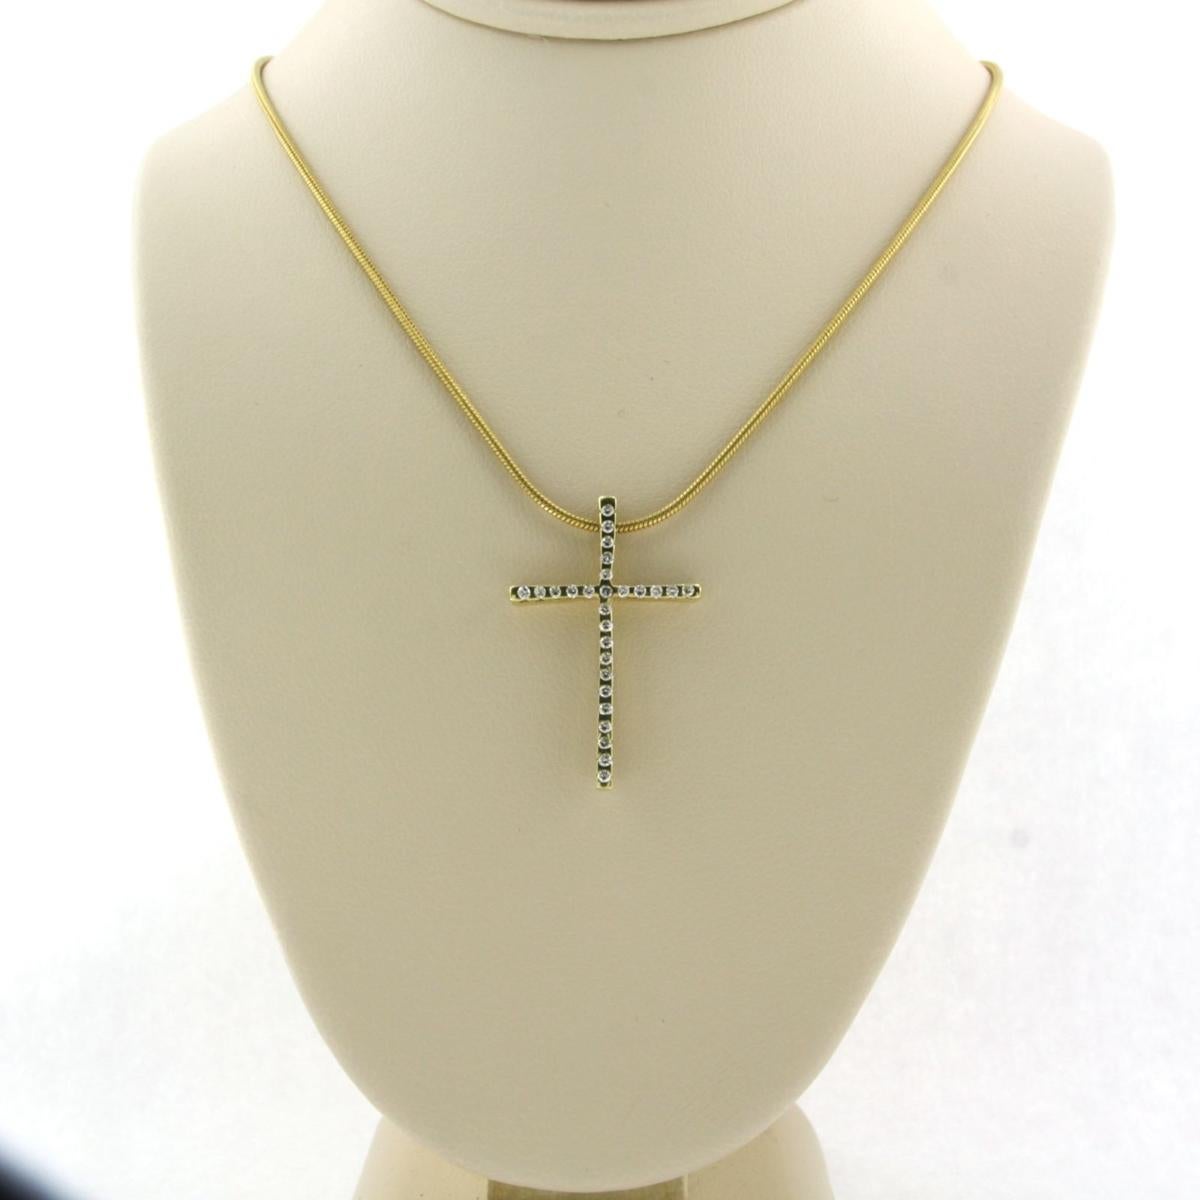 14k yellow gold necklace with pendant set with brilliant cut diamonds up to . 0.27ct - F/G - VS/SI - 45 cm long

detailed description

the length of the necklace is 45 cm long

the size of the pendant is 2.6 cm long by 1.7 cm wide

weight 6.6